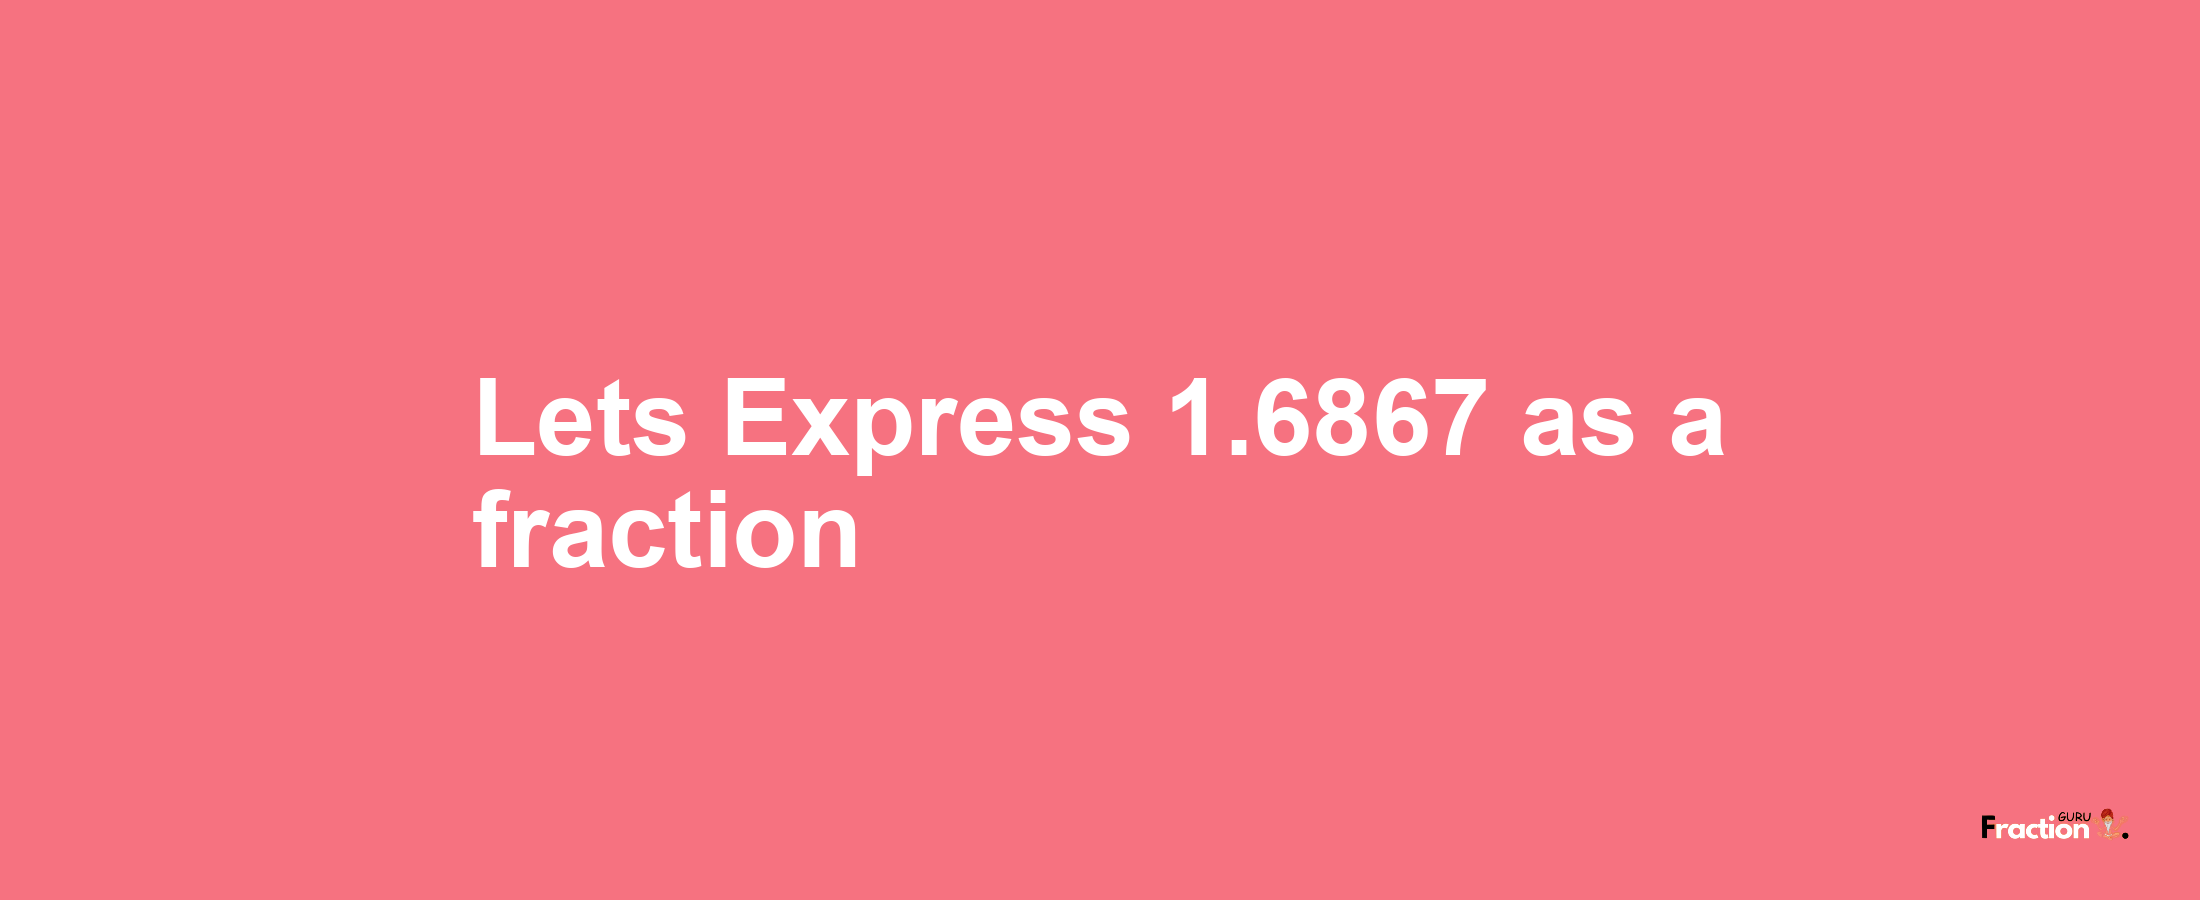 Lets Express 1.6867 as afraction